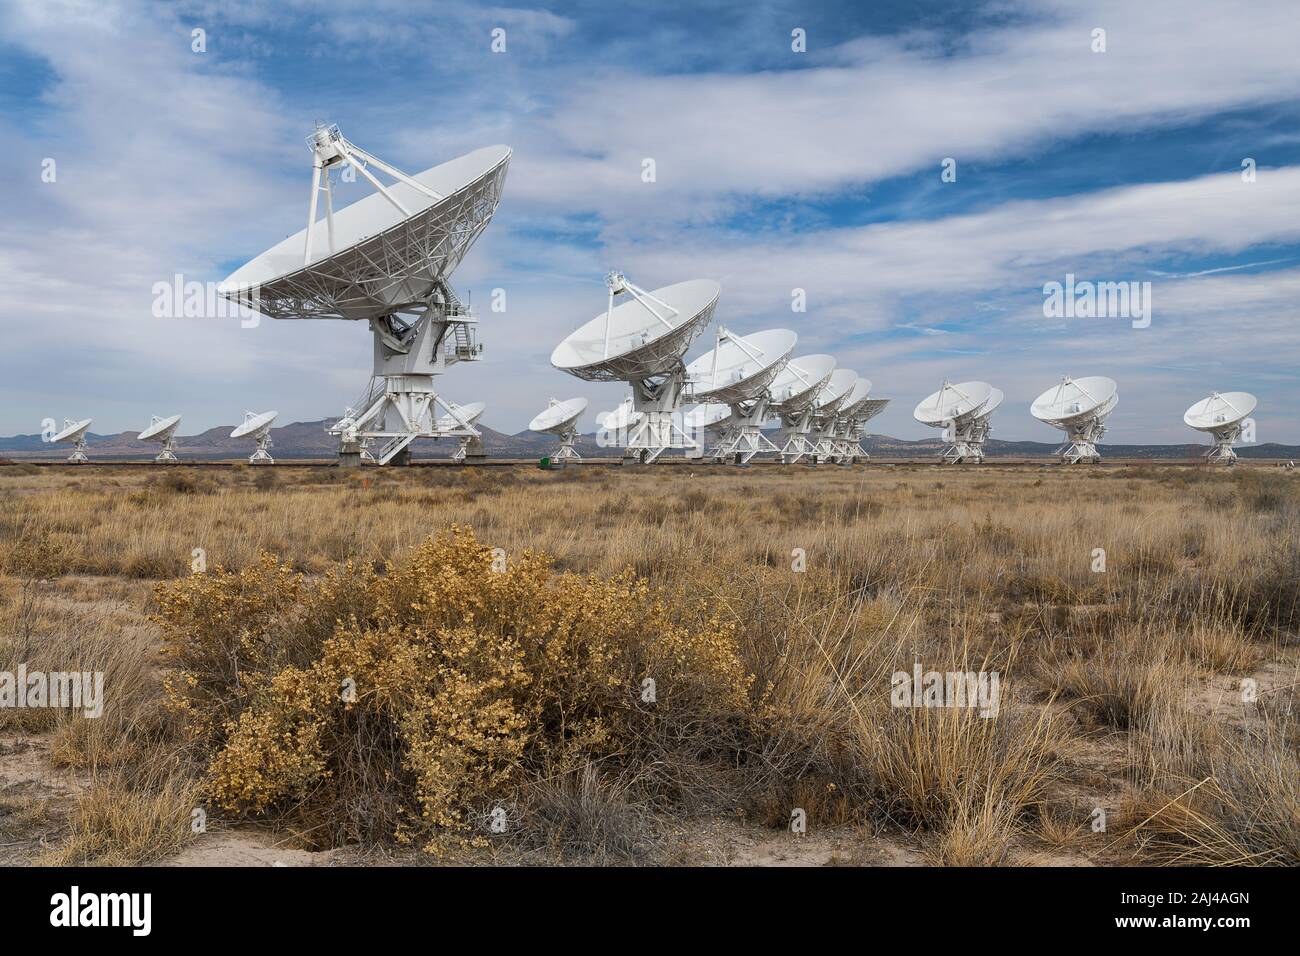 Very Large Array (VLA) radio telescope observatory on the plains of the San Agustin desert just north of Magnalena, New Mexico Stock Photo